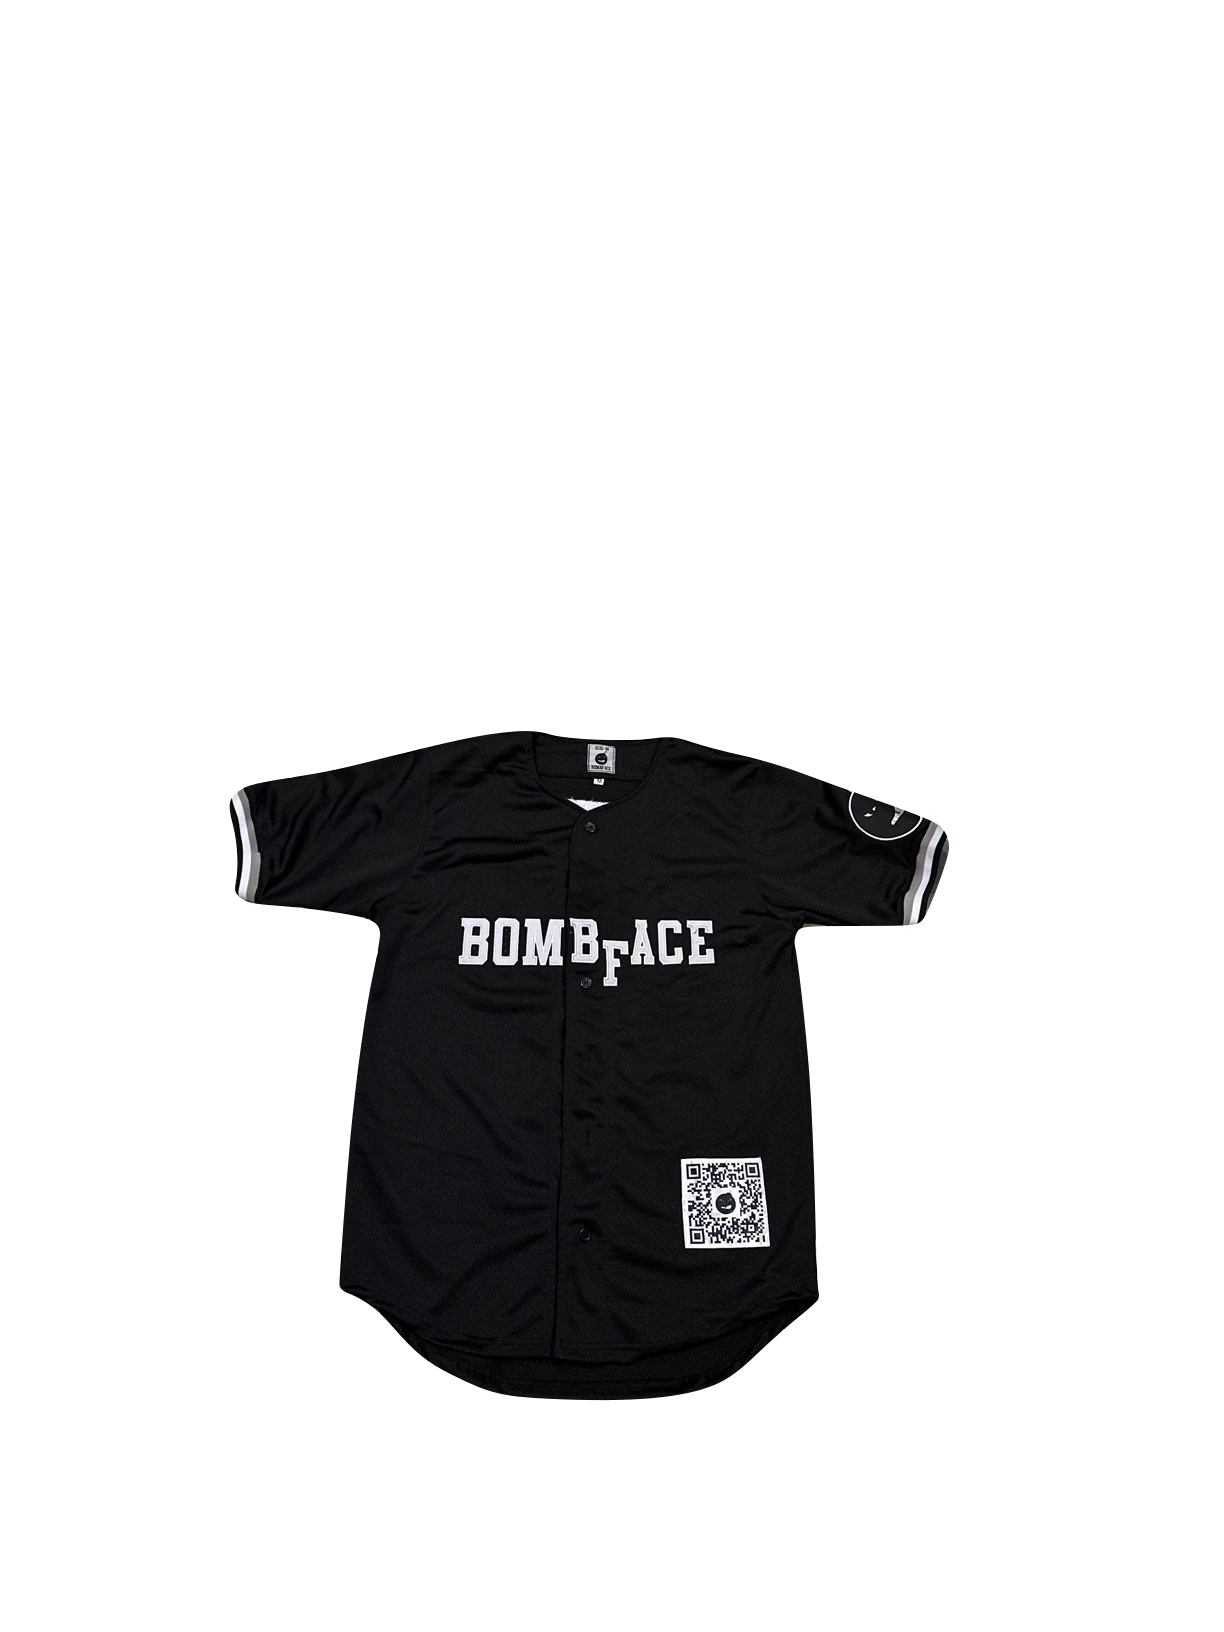 Black baseball jersey. Black Jersey, Baseball jersey, Button down baseball jersey. Button up baseball jersey. Black cotton jersey. Black baseball jersey with embroidery.